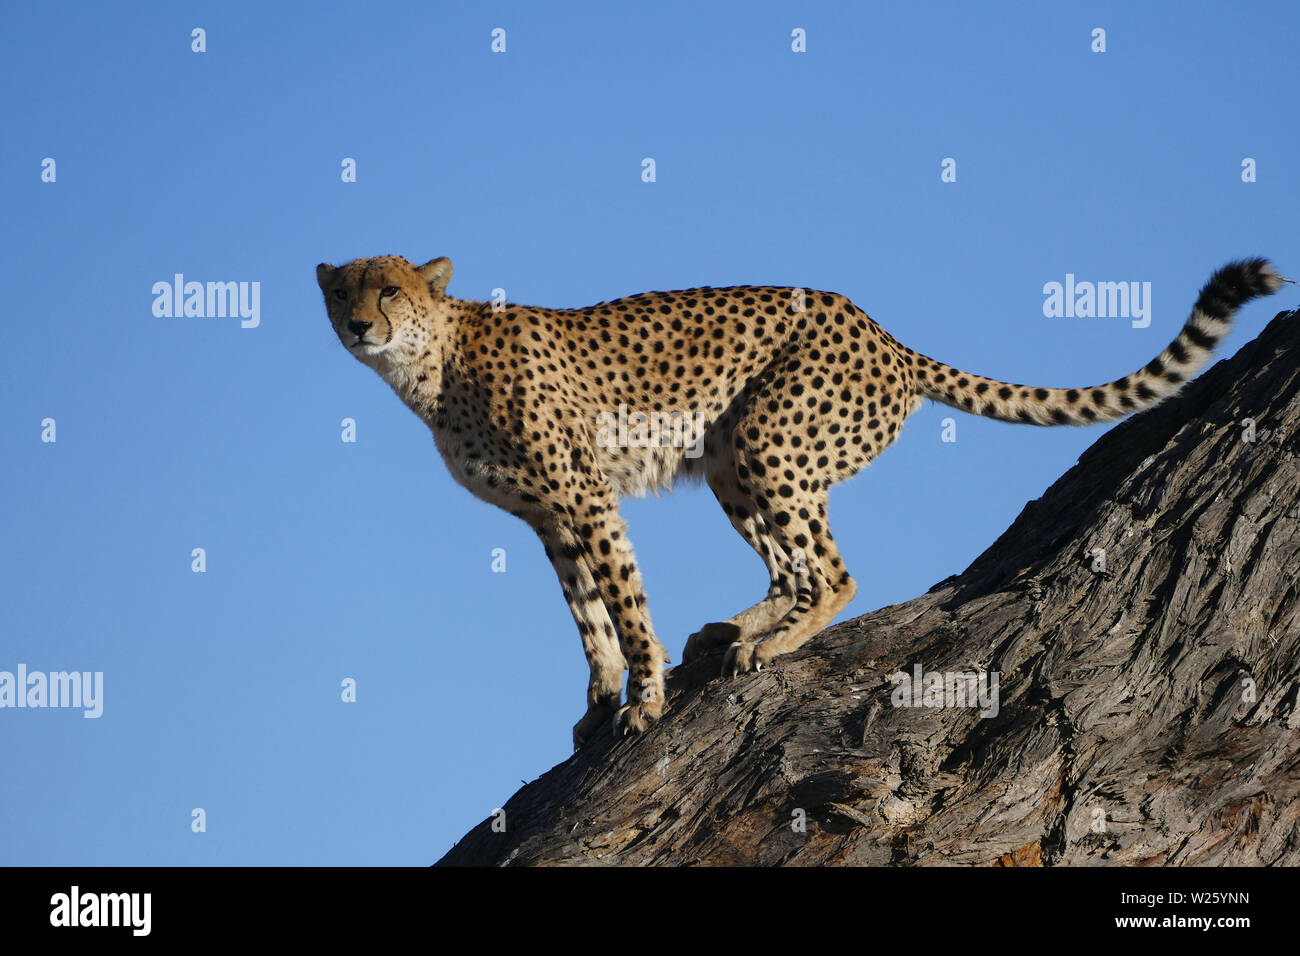 Cheetah standing in tree ready to jump down Stock Photo